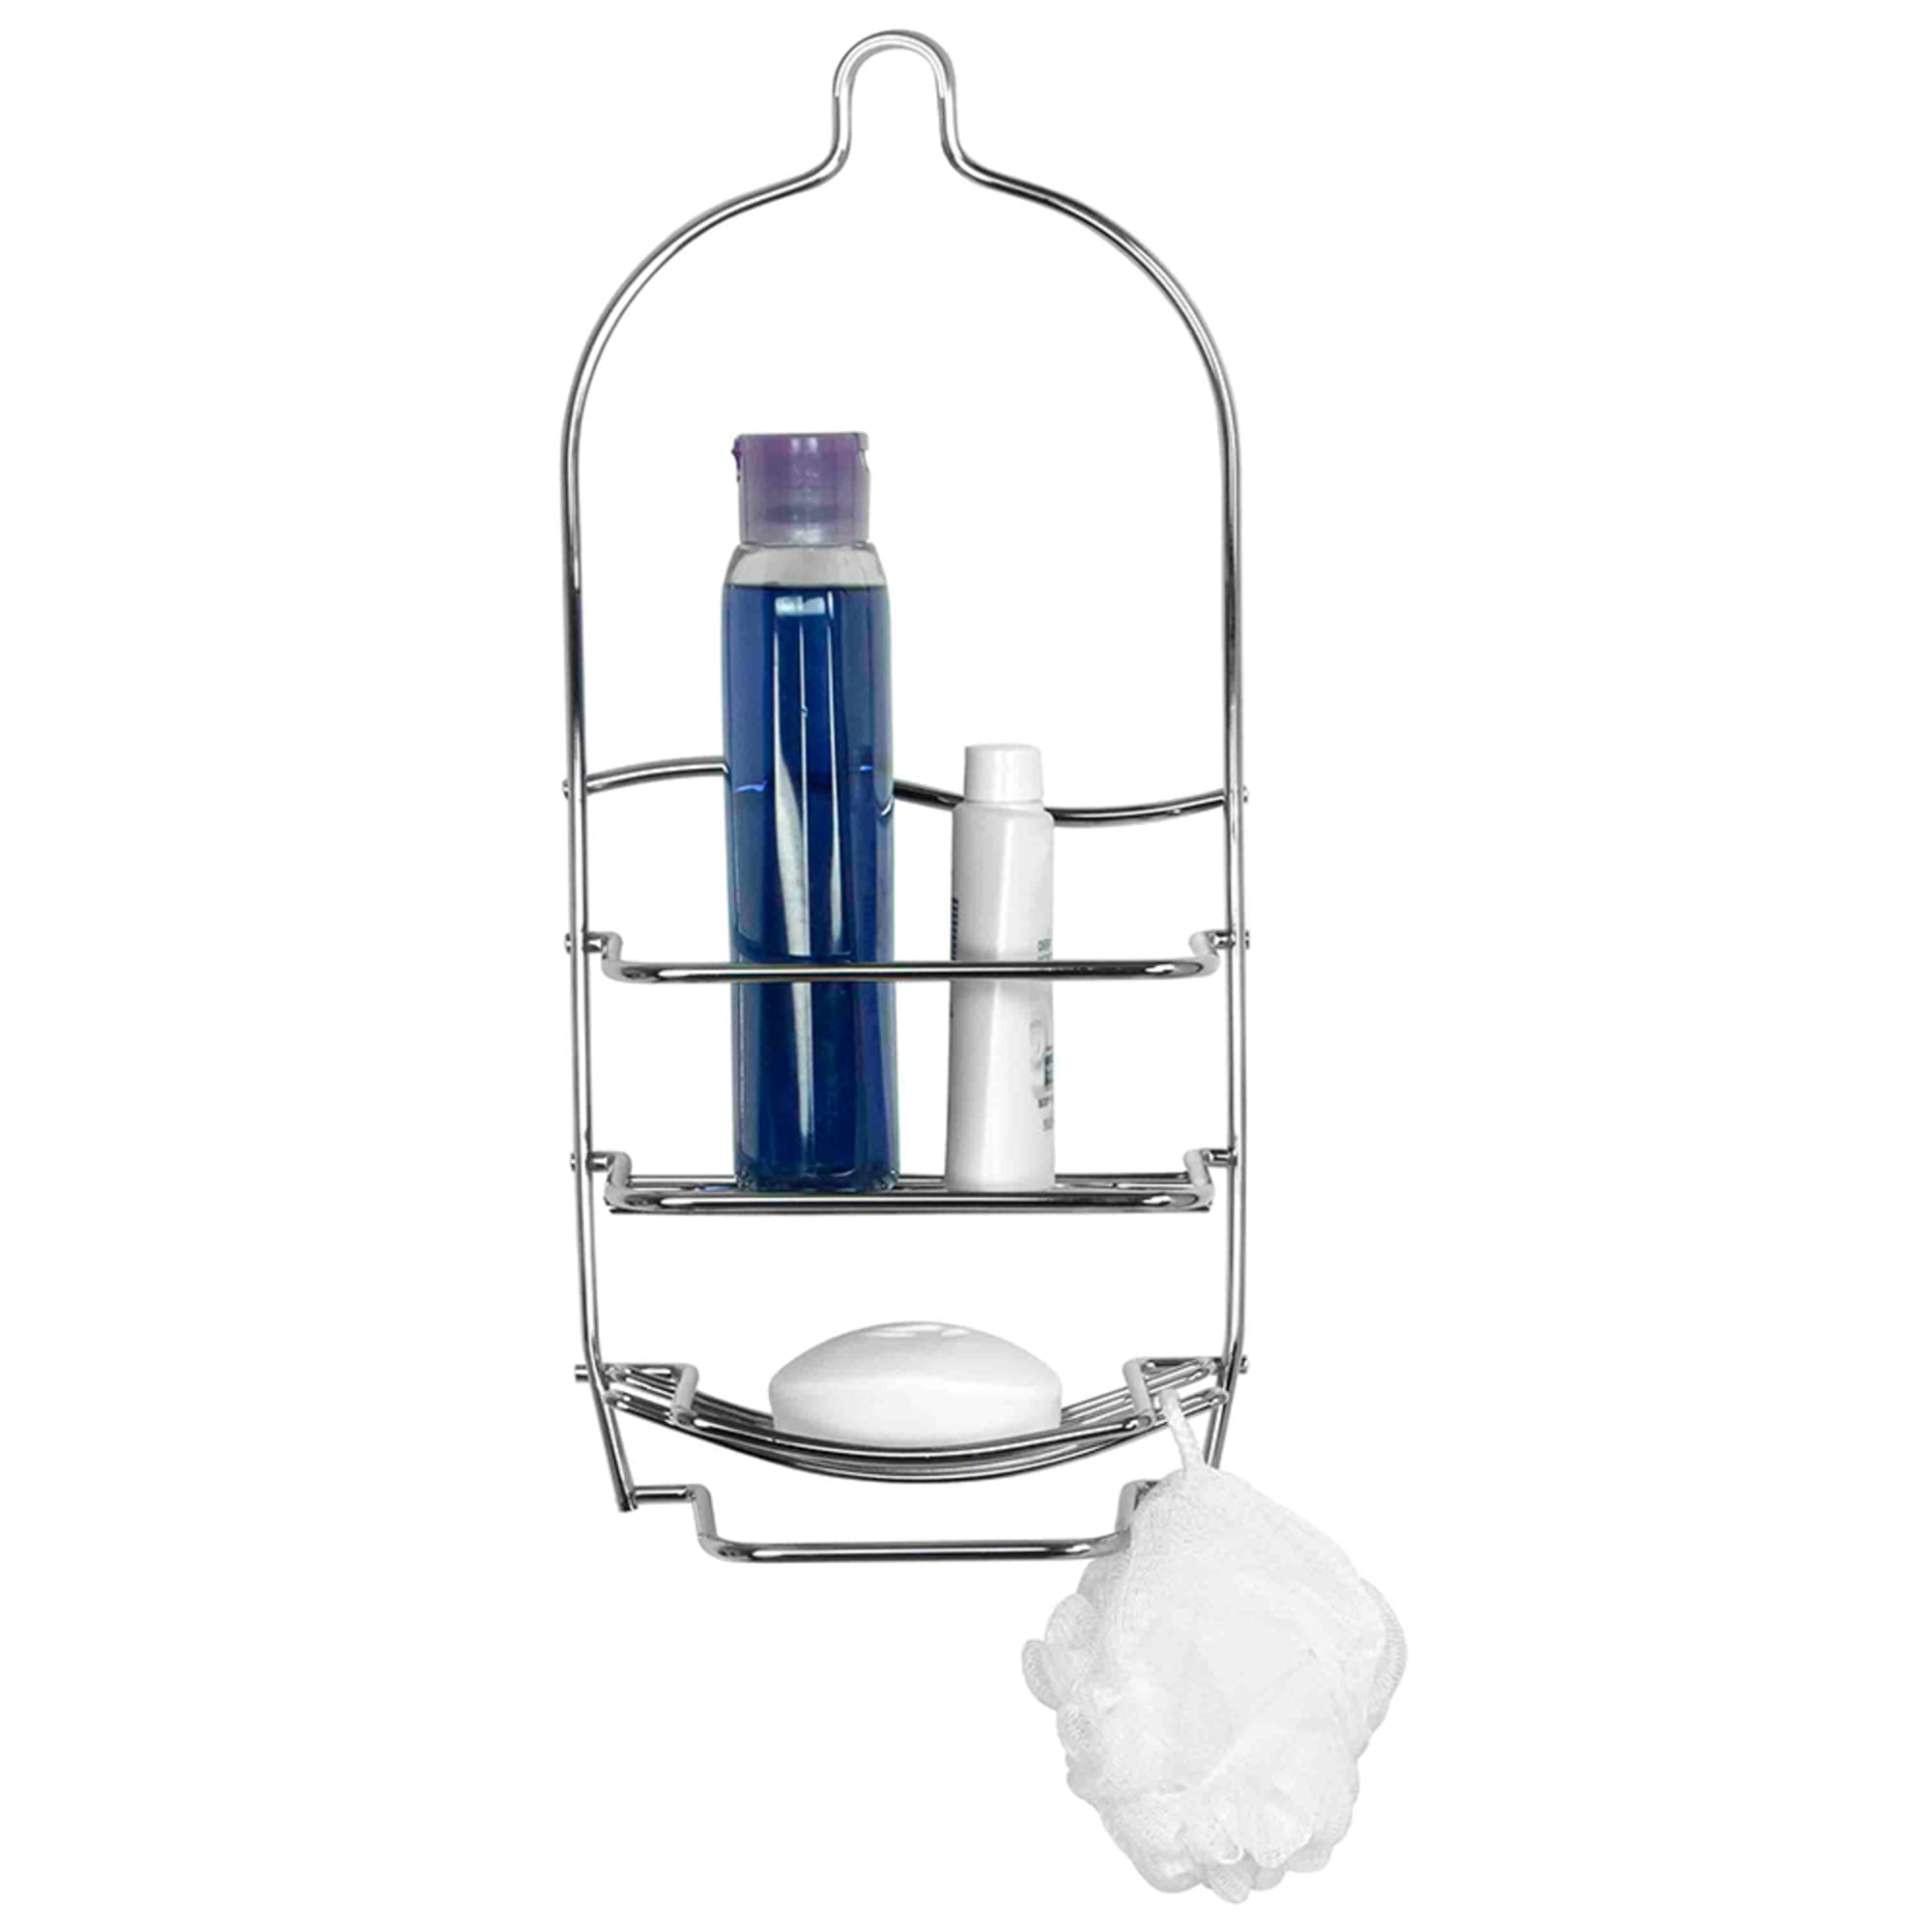 Home Basics Chrome Plated Steel Shower Caddy With Wash Cloth Bar $10.00 EACH, CASE PACK OF 12